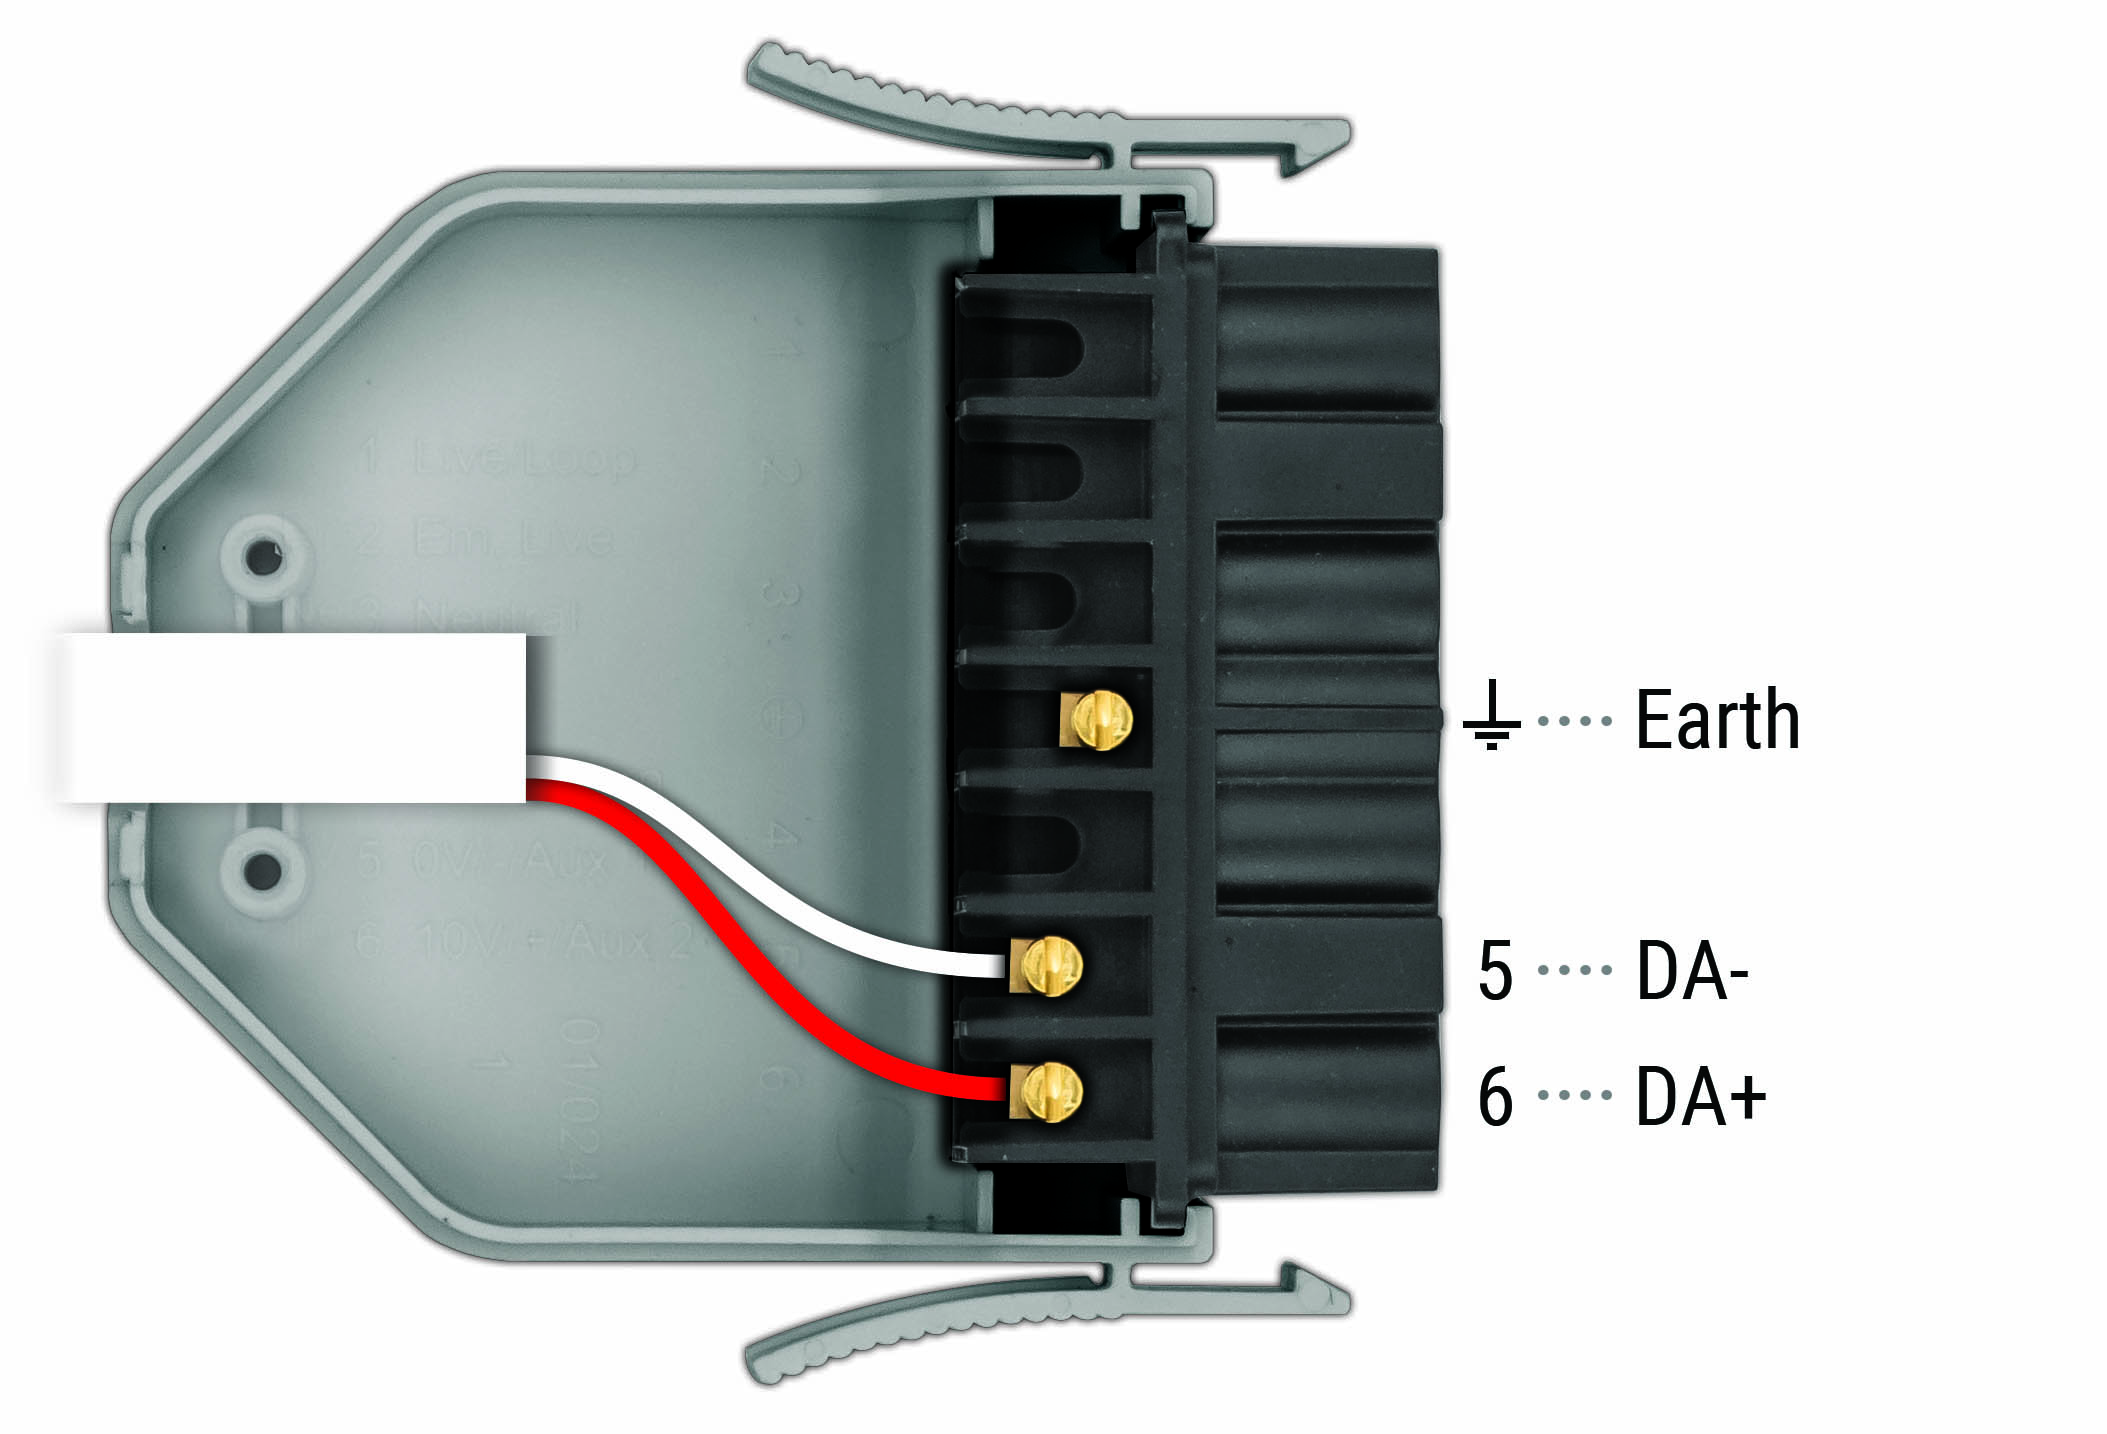 Wiring diagram for a flex7 2-core 3rd party control lead.